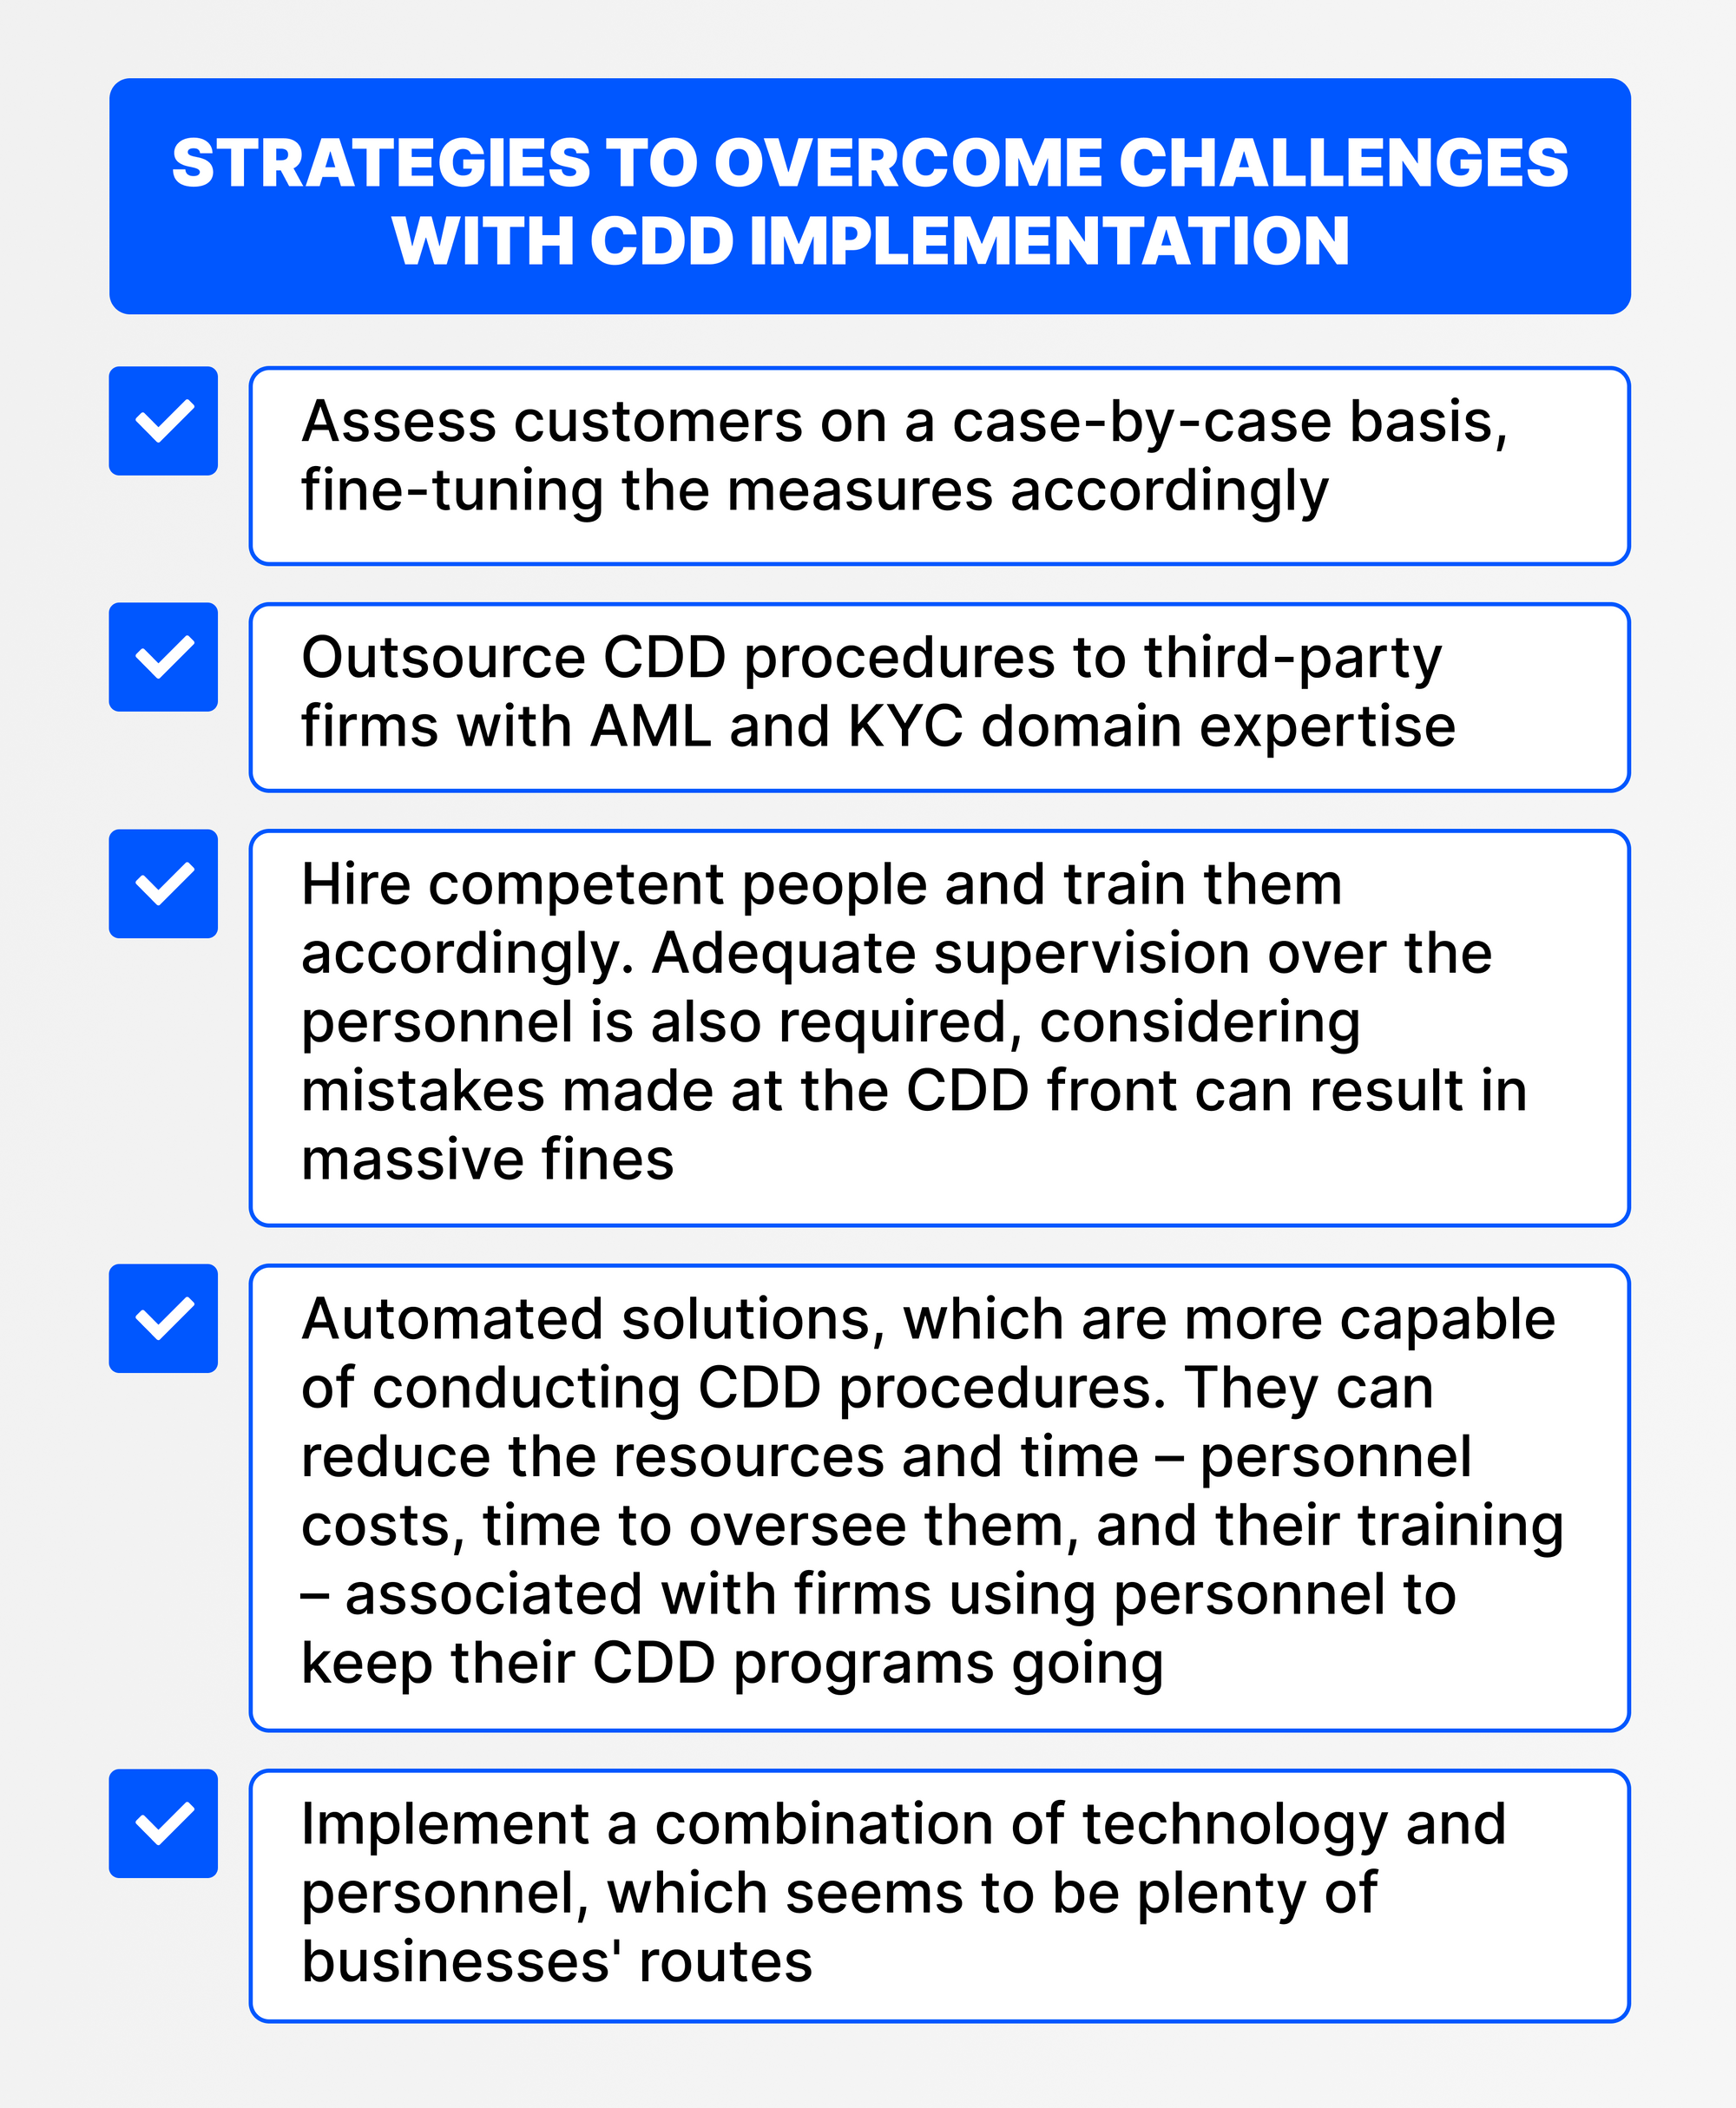 STRATEGIES TO OVERCOME CHALLENGES WITH CDD IMPLEMENTATION